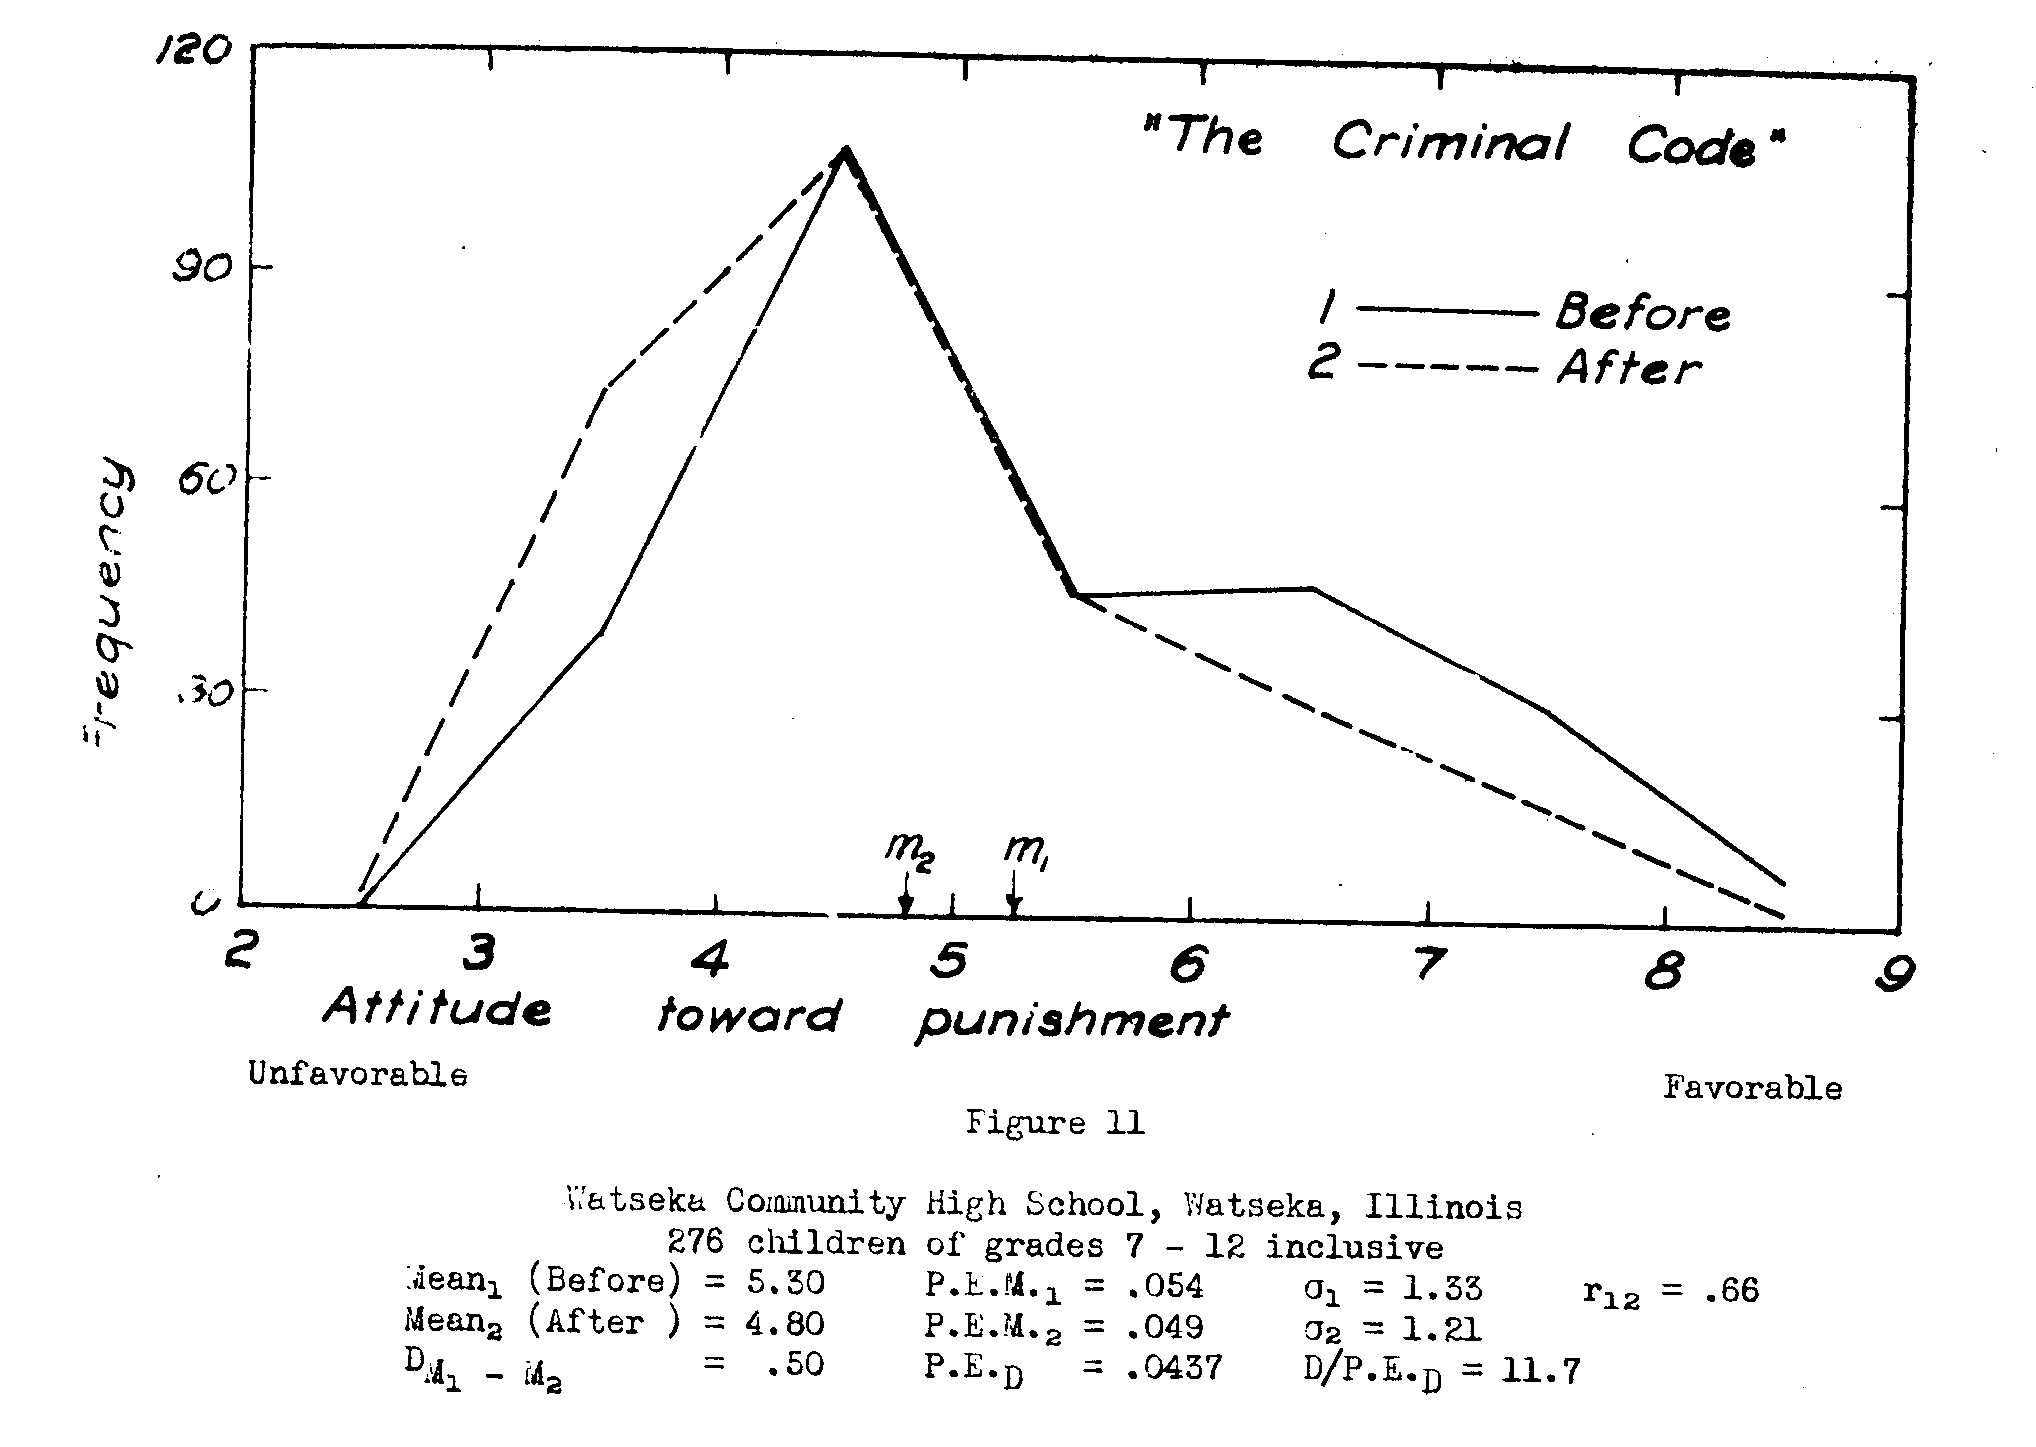 Figure 11, Attitude toward punishment, before and after THE CRIMINAL CODE